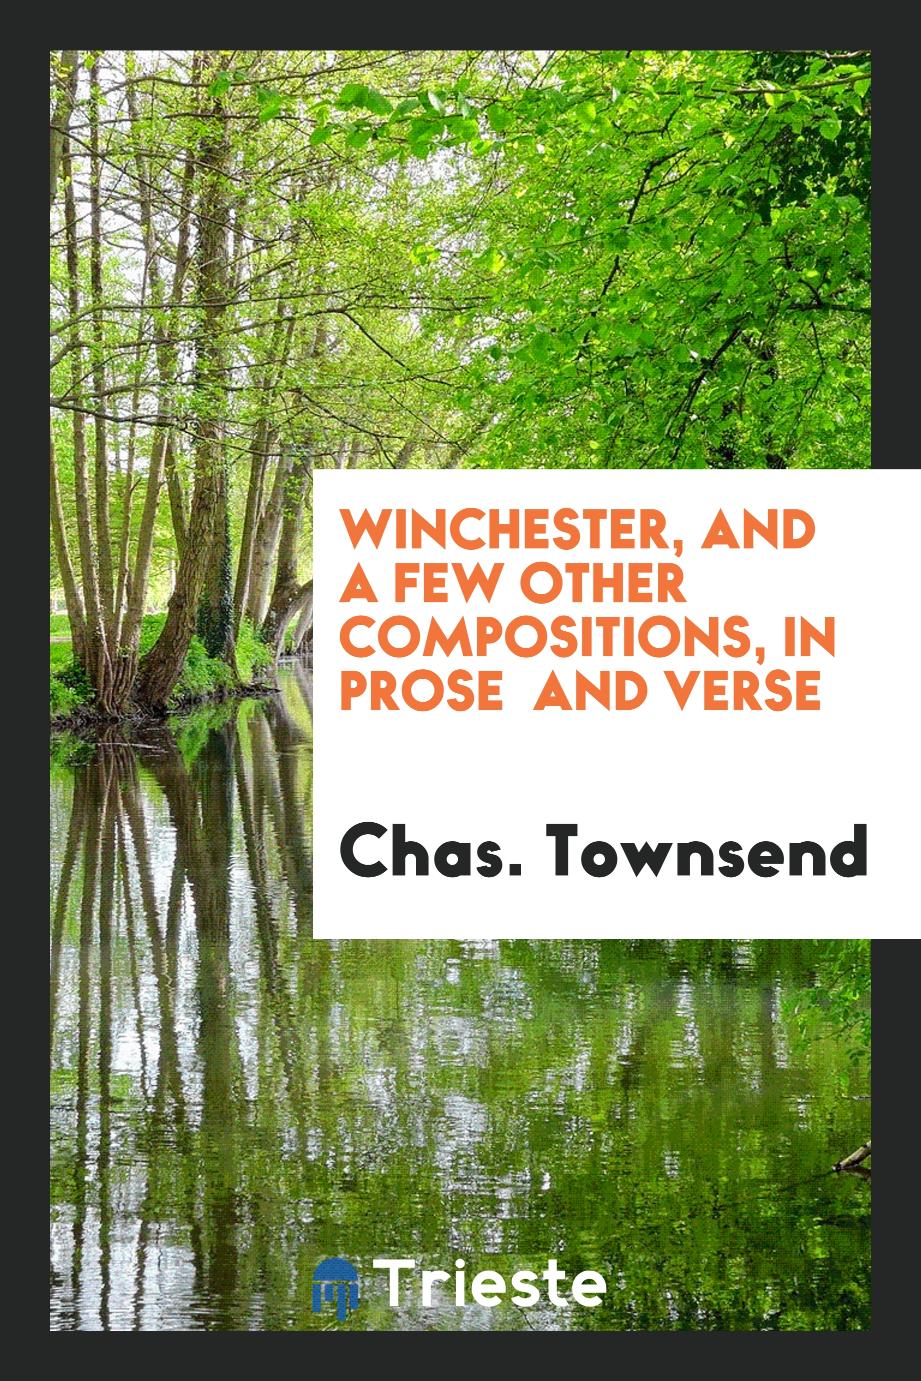 Winchester, and a few other compositions, in prose and verse